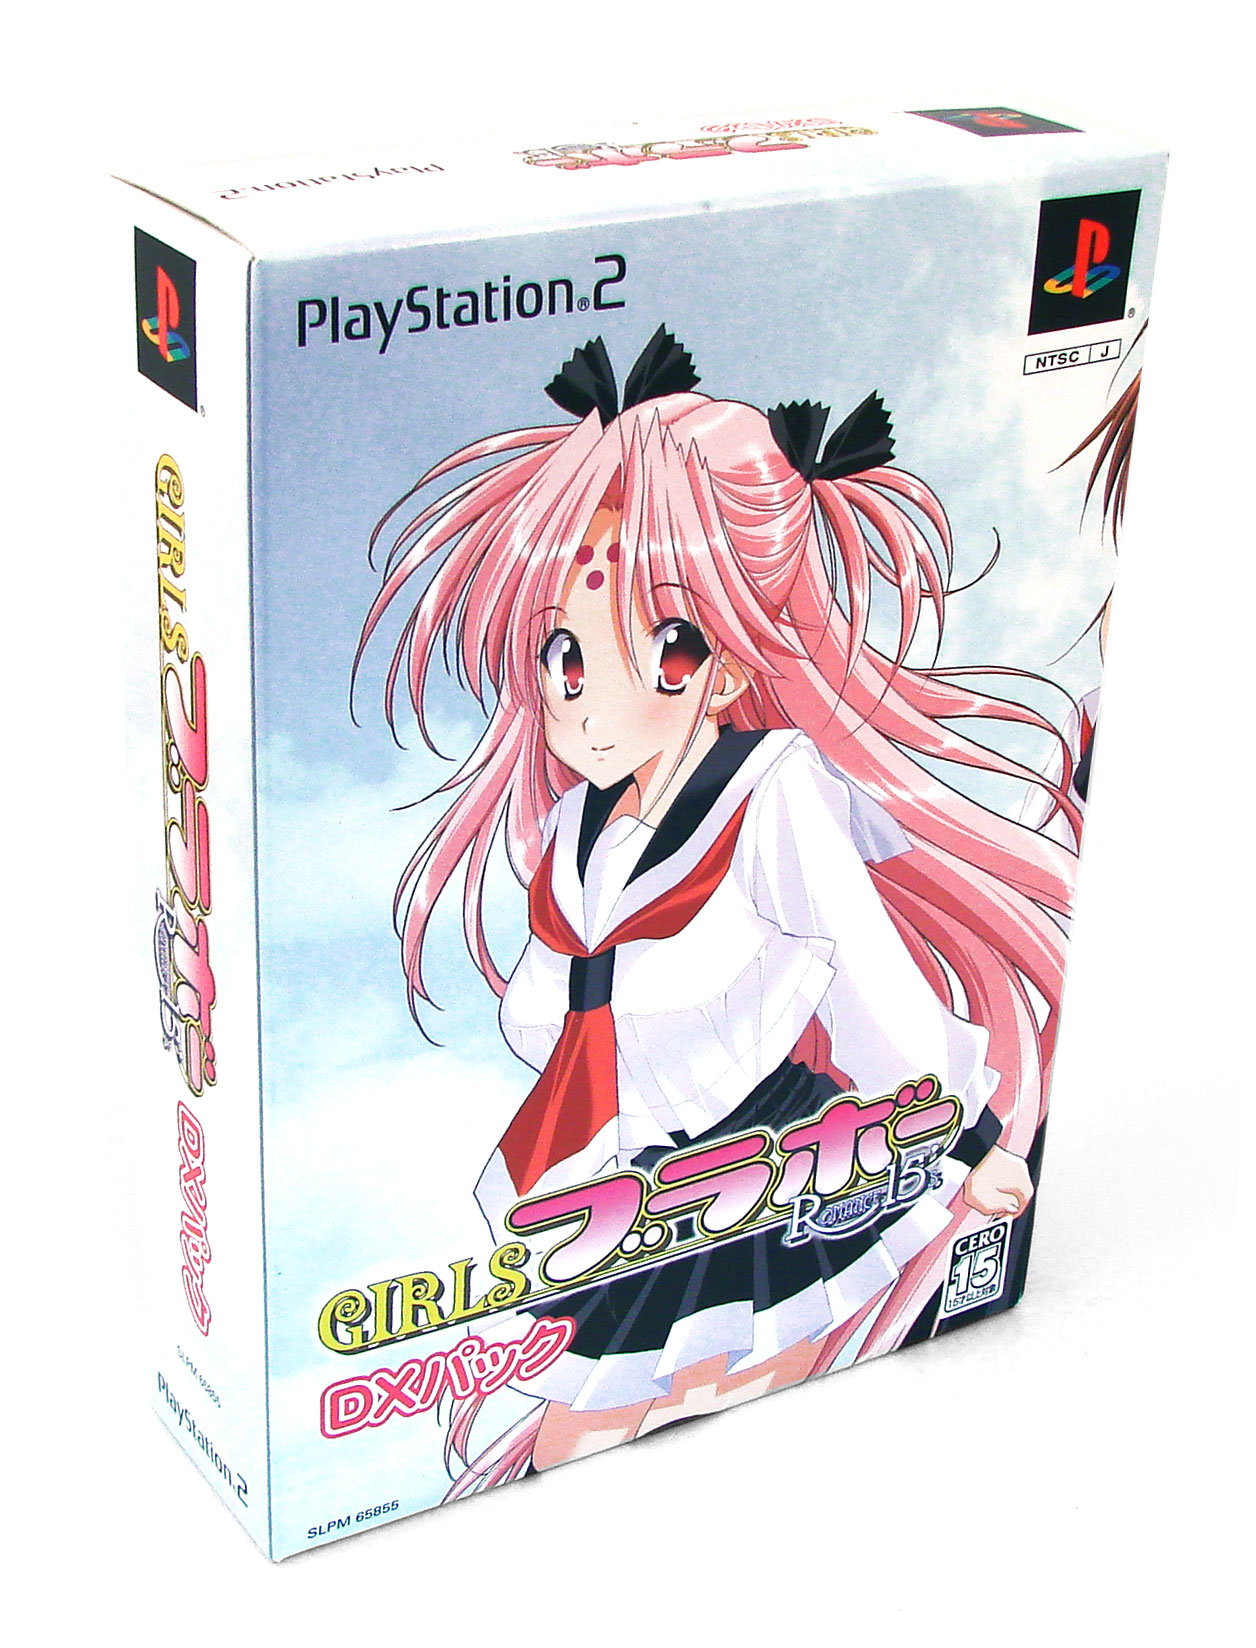 Girls Bravo: Romance 15's [Deluxe Pack] for PlayStation 2